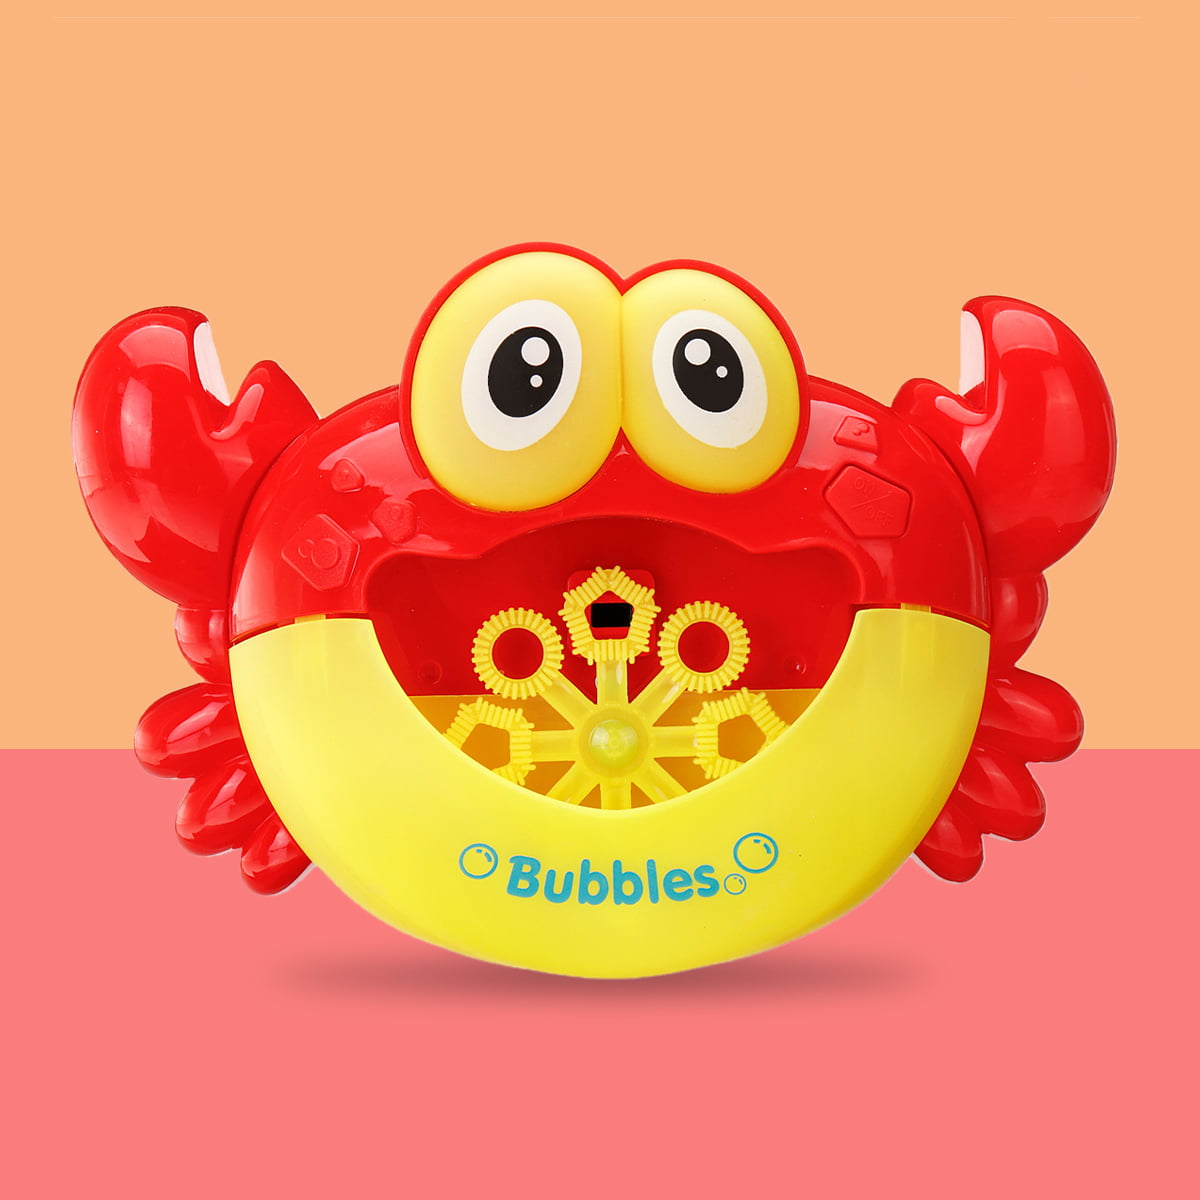 Frudaca Bubble Machine Bubble Maker Automatic Bubble Blower Battery Operated Musical Crab Bath Bubble Toys for Kids/Baby/Boys/Girls